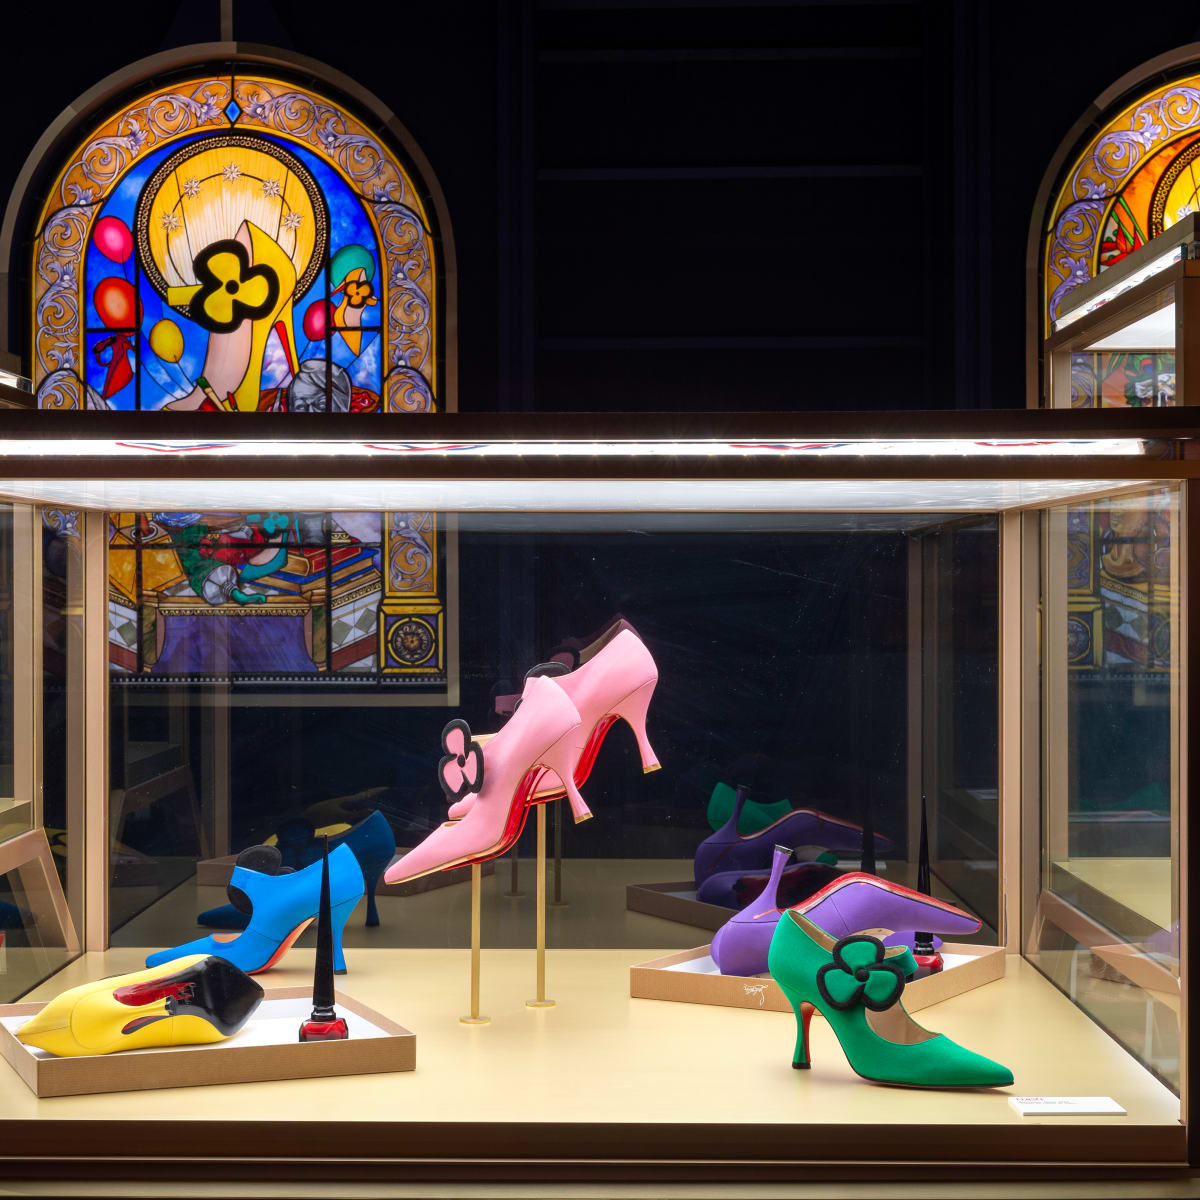 Christian Louboutin's New Paris Exhibit Looks Beyond the Red Sole